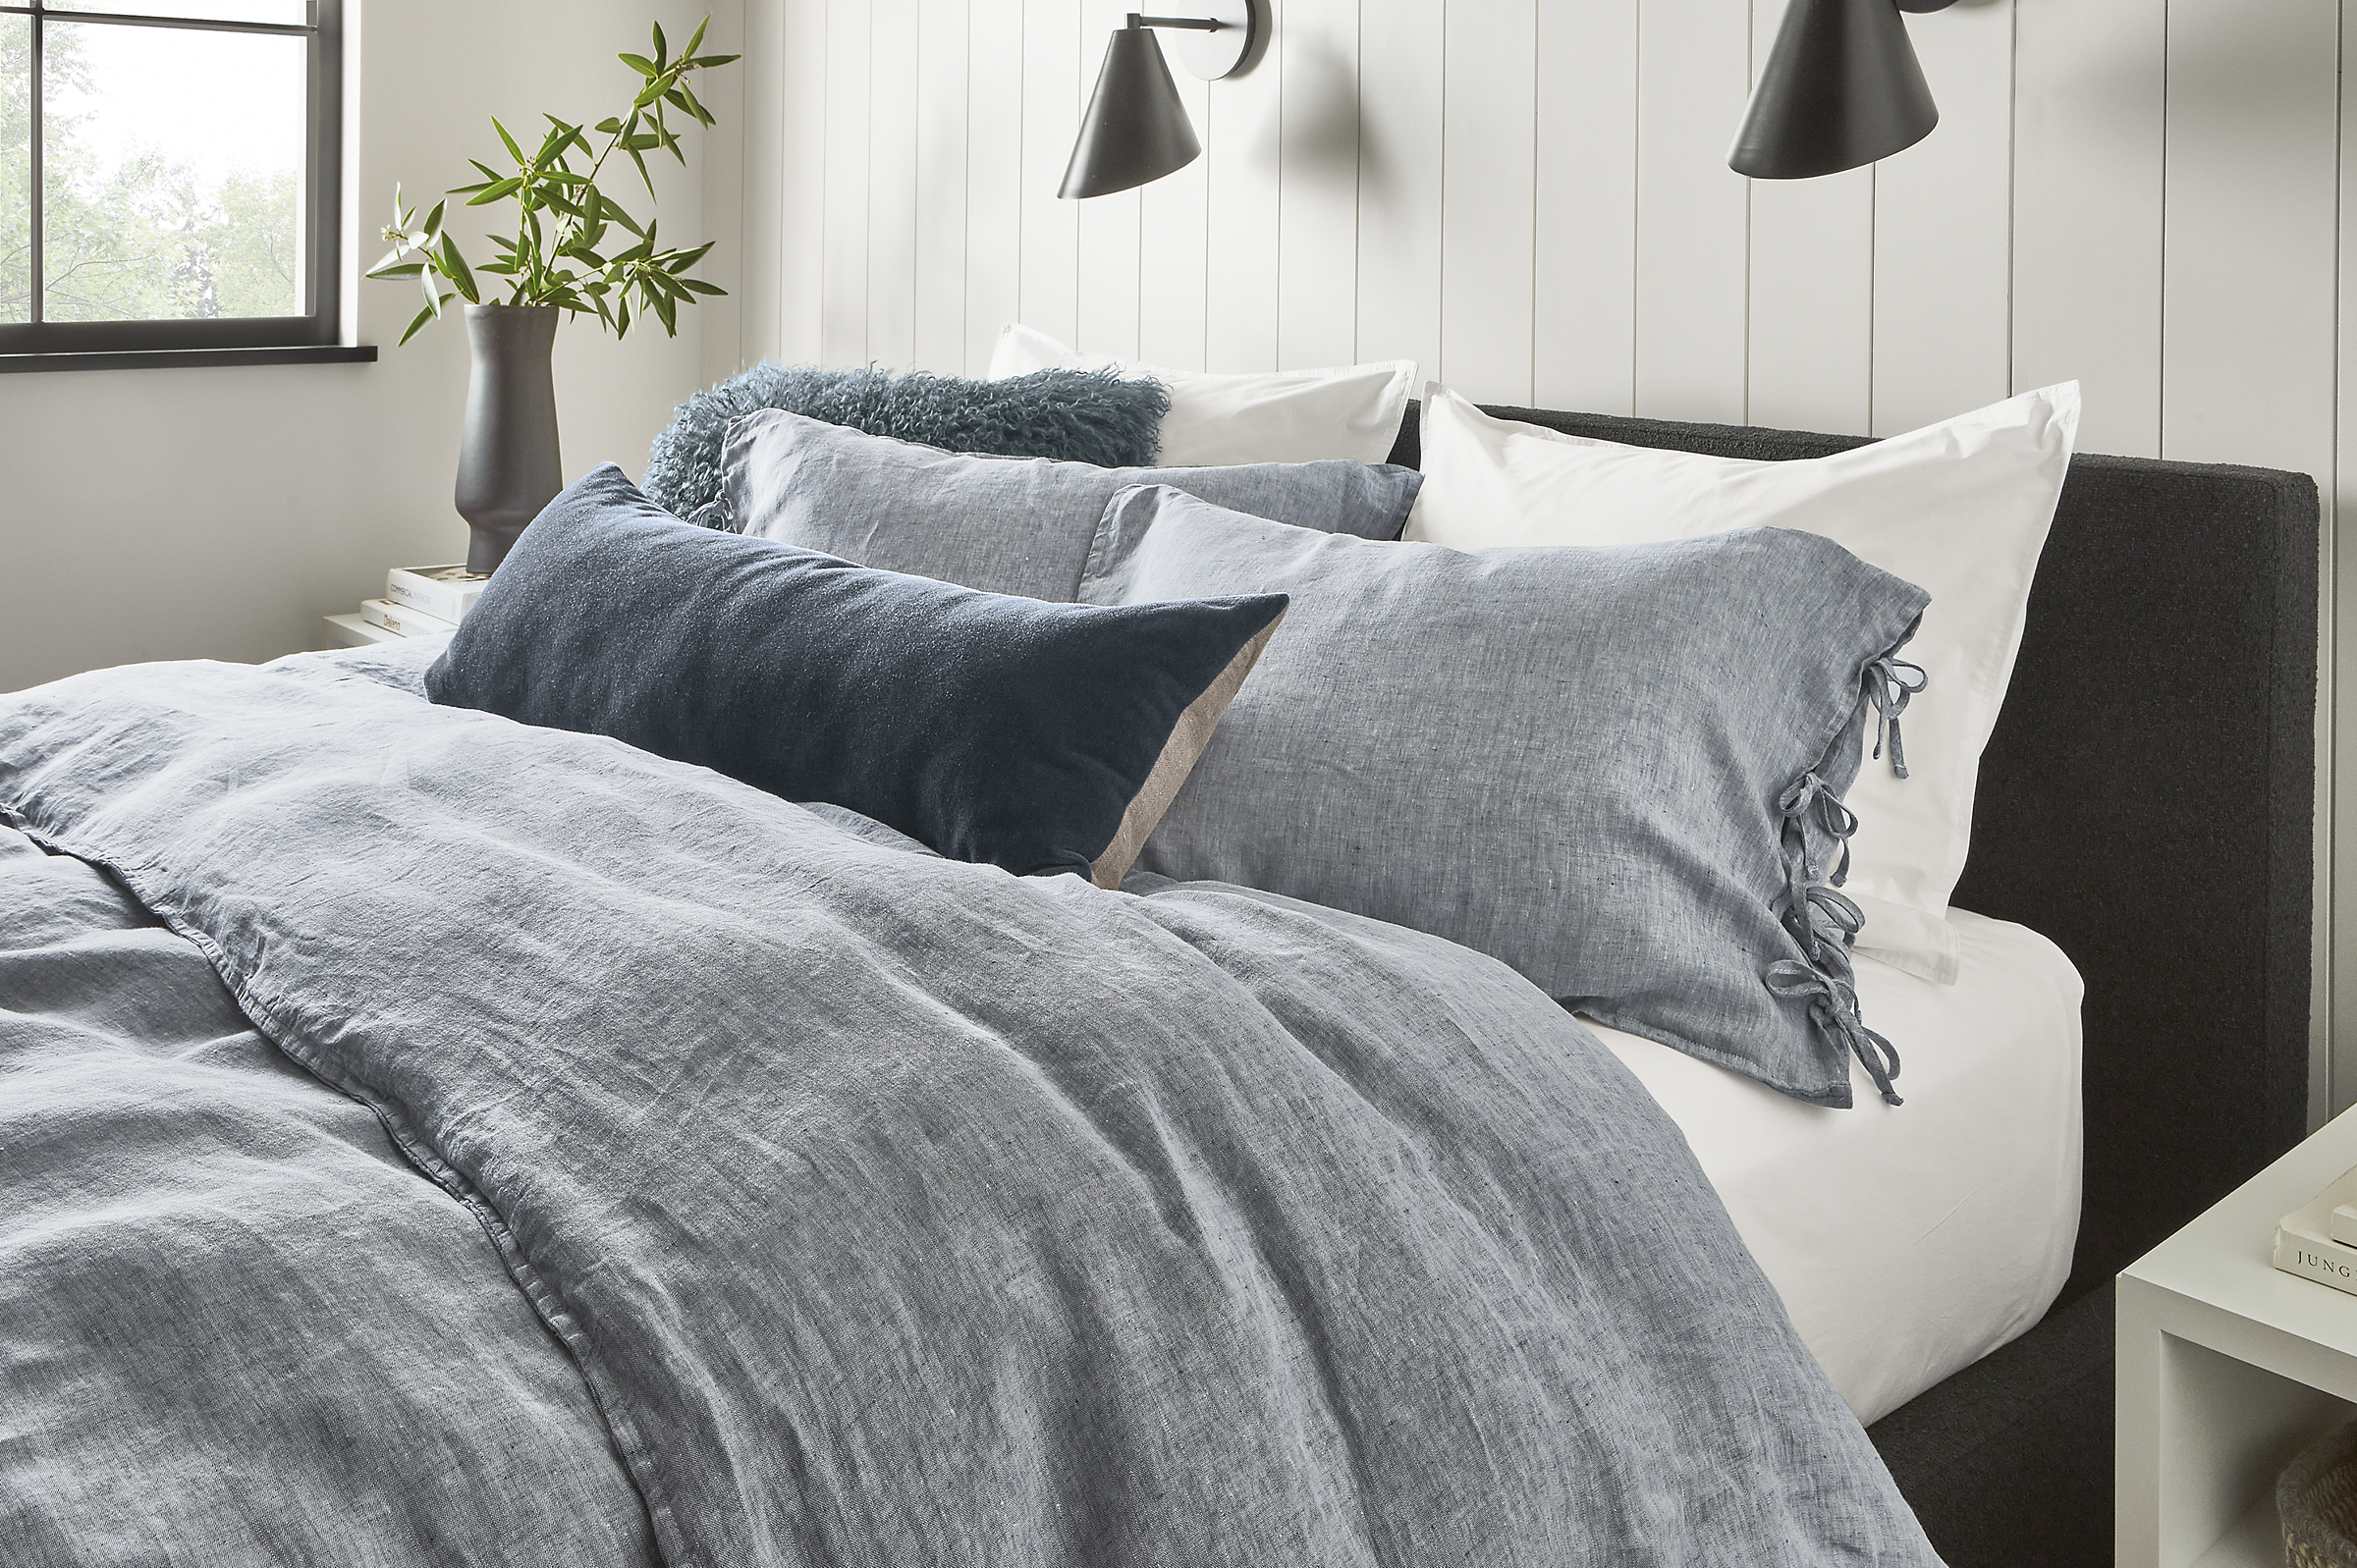 detail of bed with relaxed linen shams, duvet cover, signature percale sheets, mohair throw pillow.